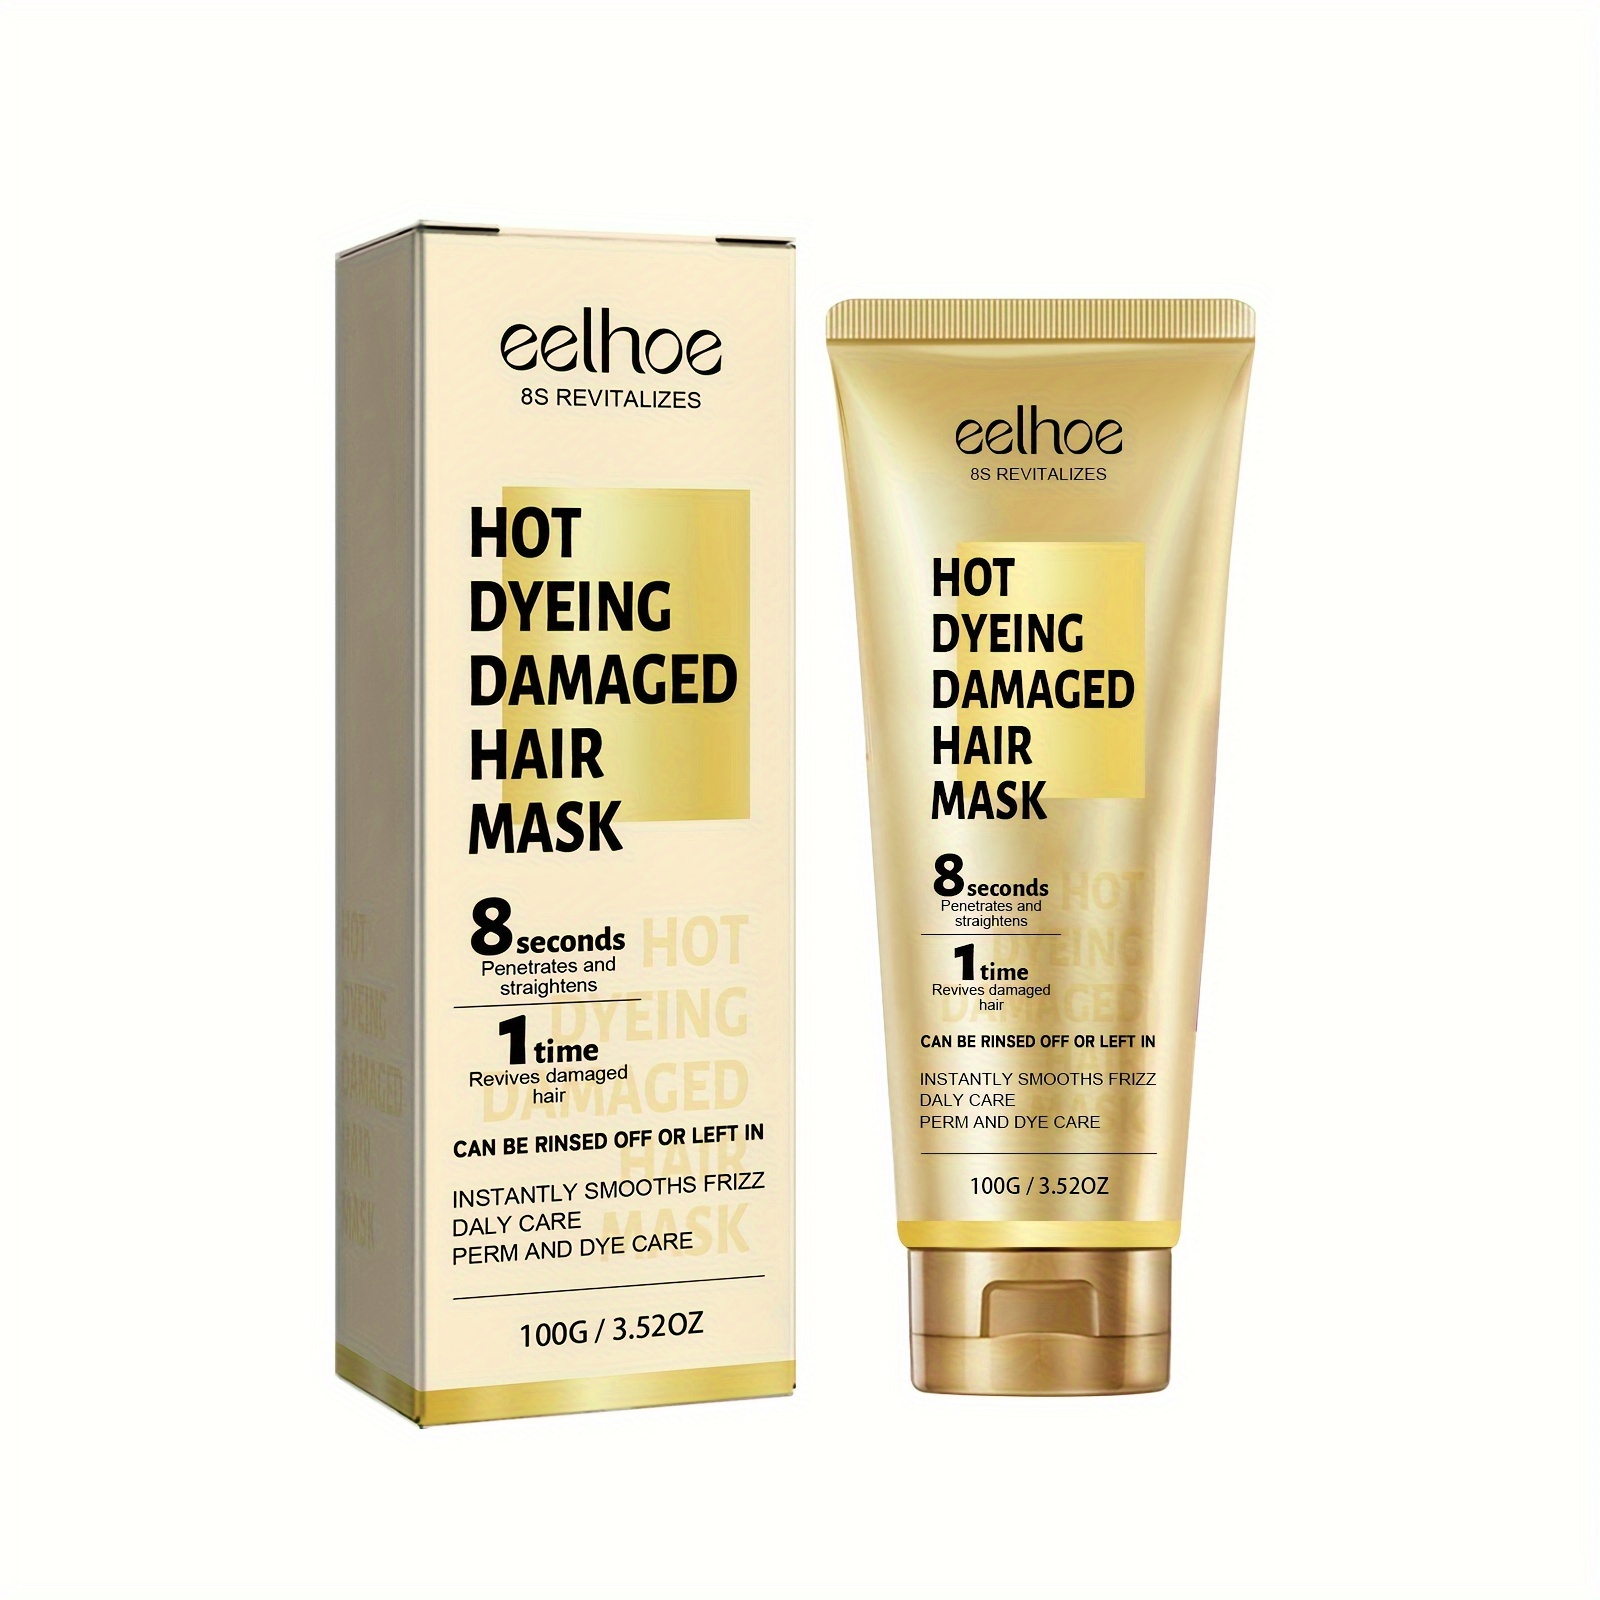 

100g Keratin Hair Care Cream, Repairs Split Ends Dry Damaged Hair, Moisturizes And Smoothes Hair